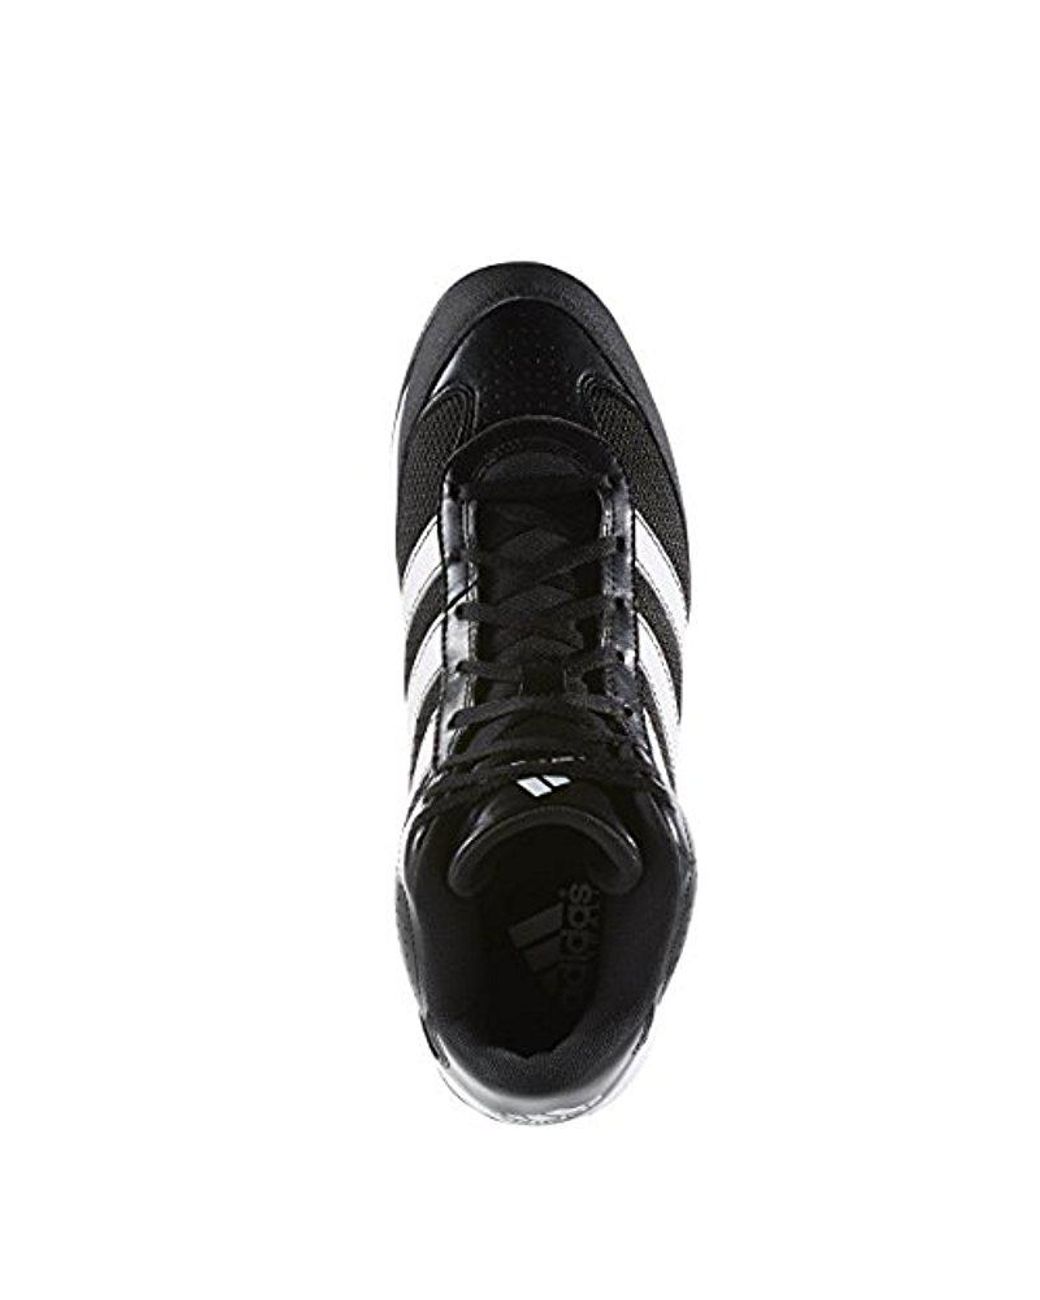 adidas Originals Leather Adidas Performance Turf Hog Lx Mid Football Cleat  in Black/White/Silver (Black) for Men | Lyst